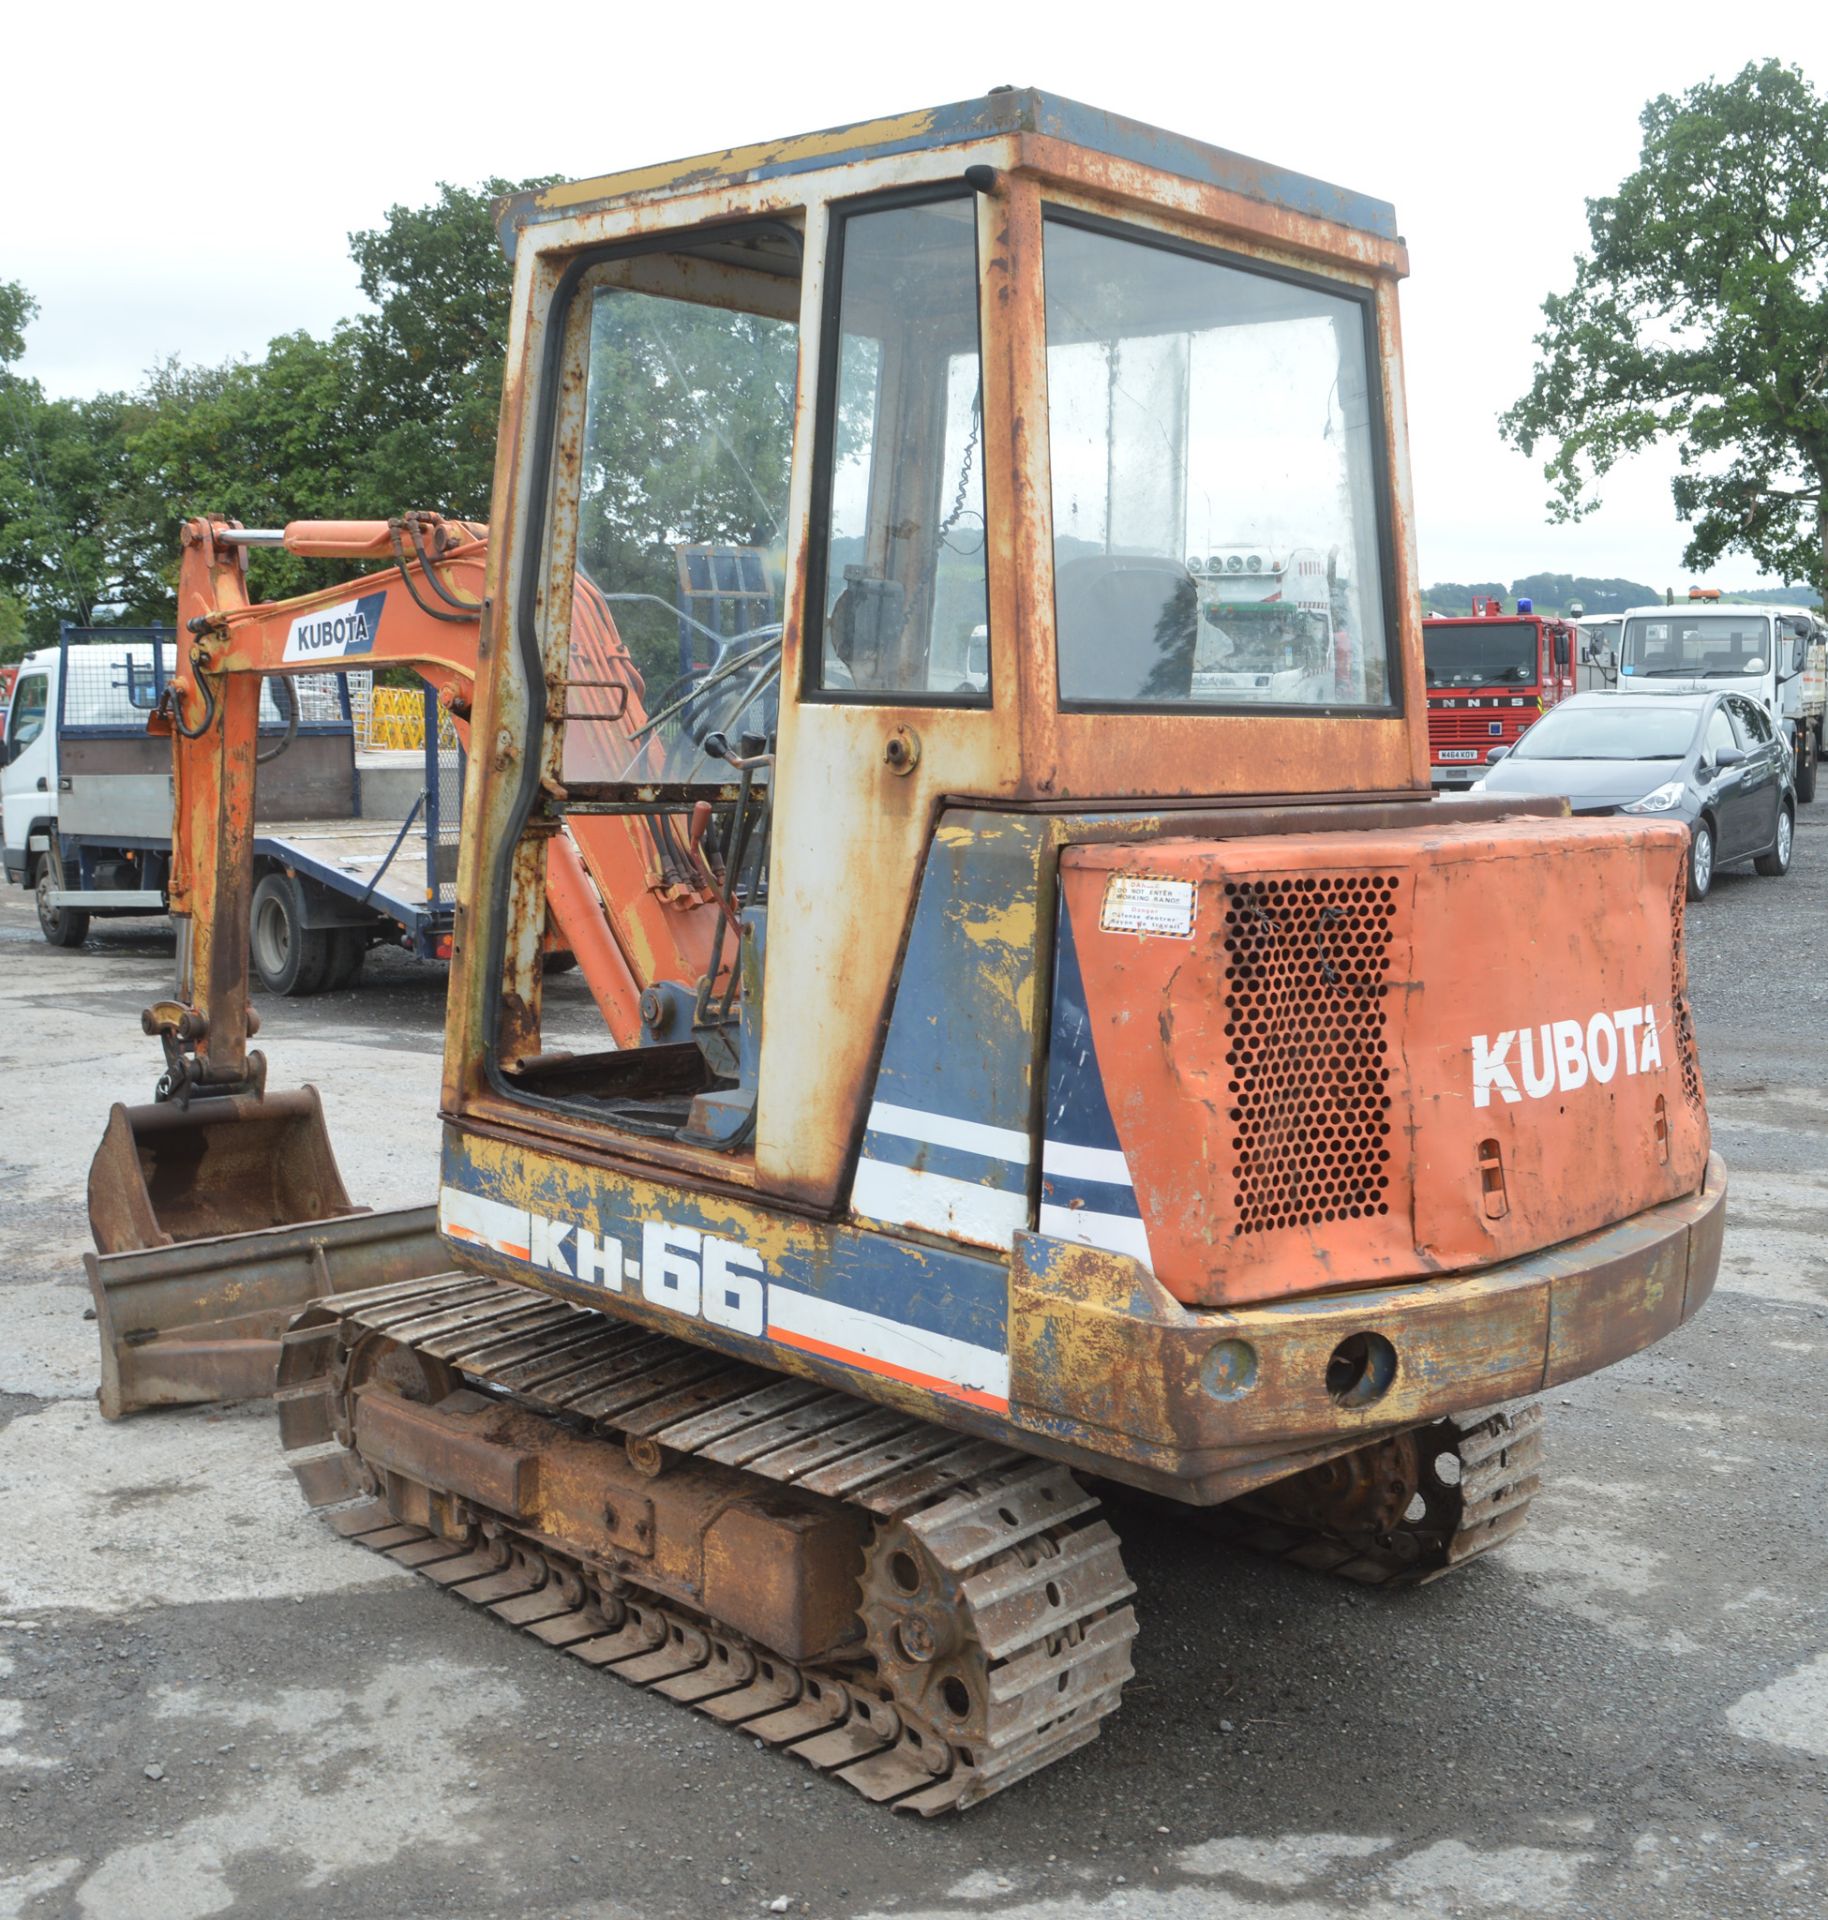 Kubota KH-66 2.8 tonne steel tracked mini digger  Year:  S/N: 13242 Recorded hours: 3422 c/w bucket, - Image 4 of 13